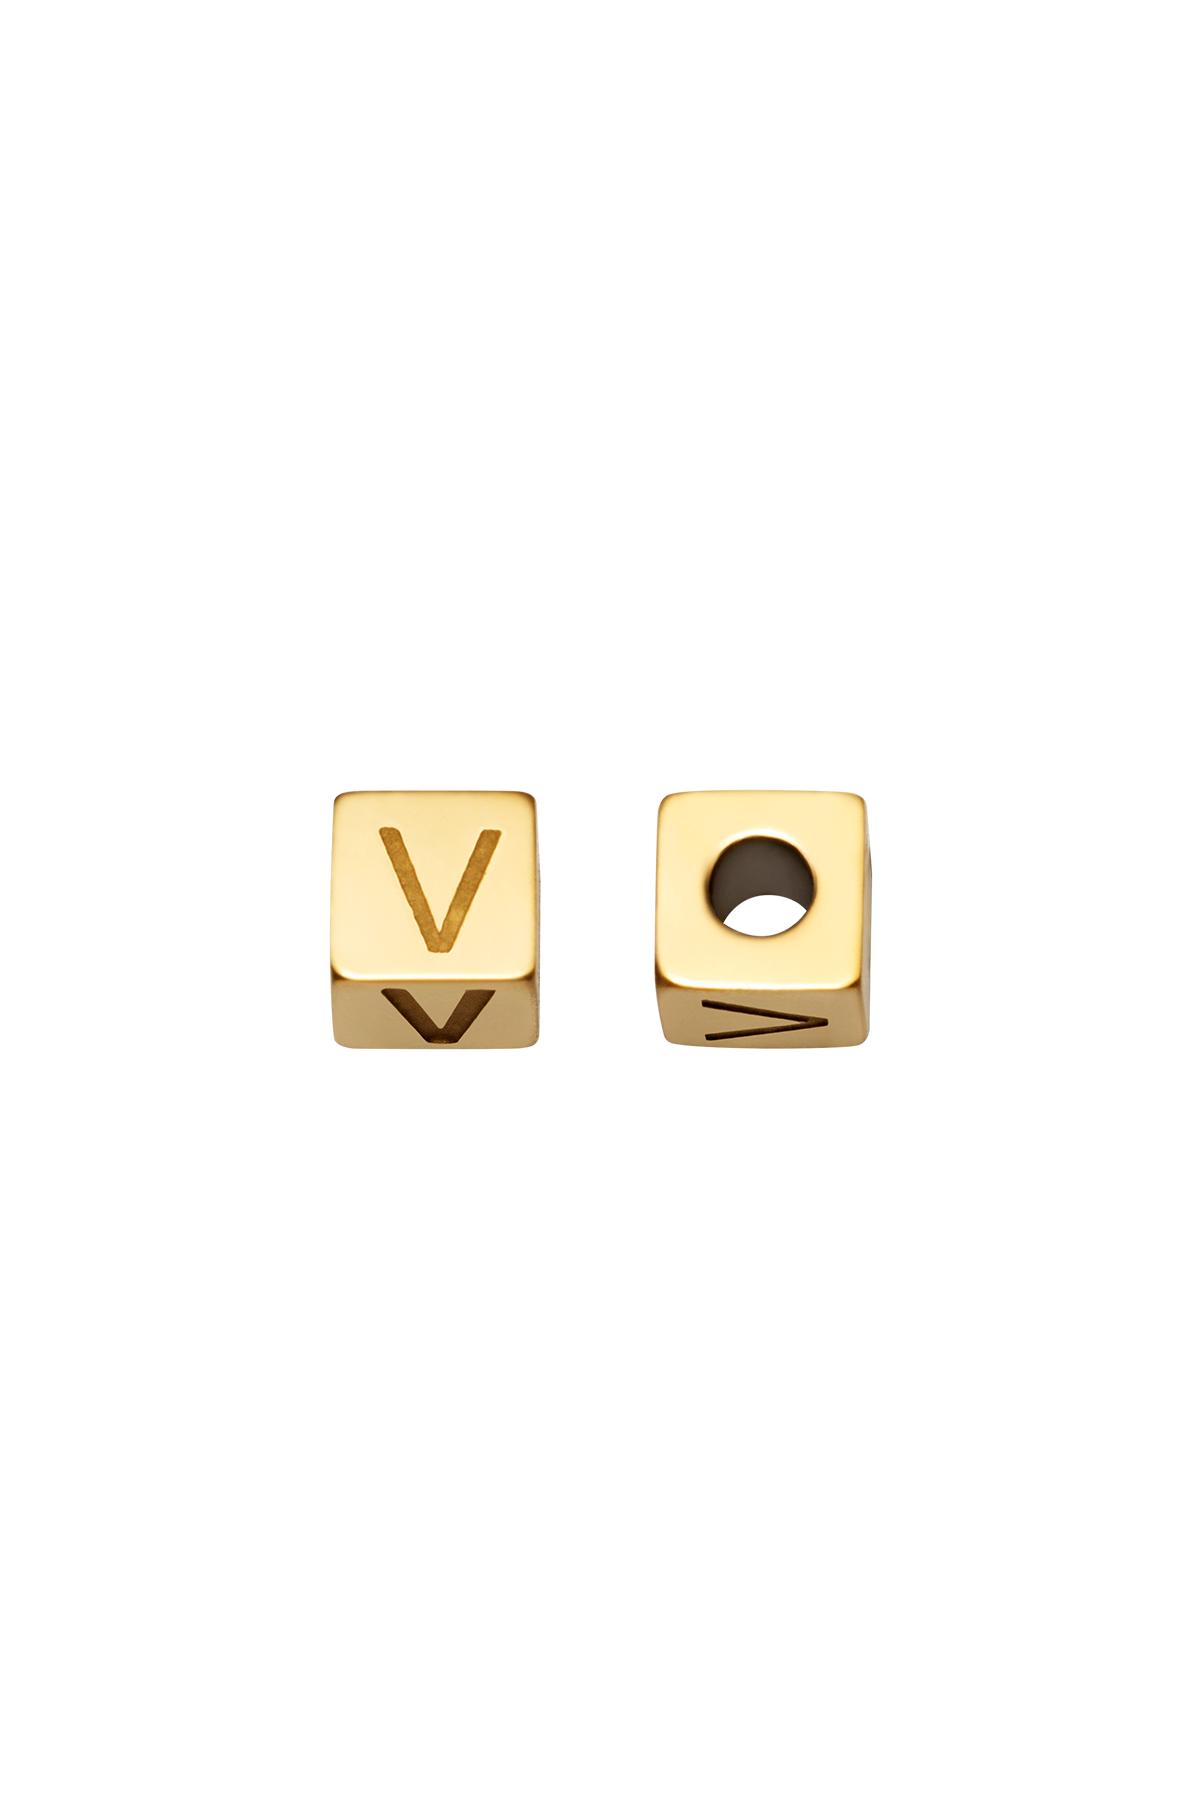 Gold / DIY Beads Alphabet Gold V Stainless Steel Picture12